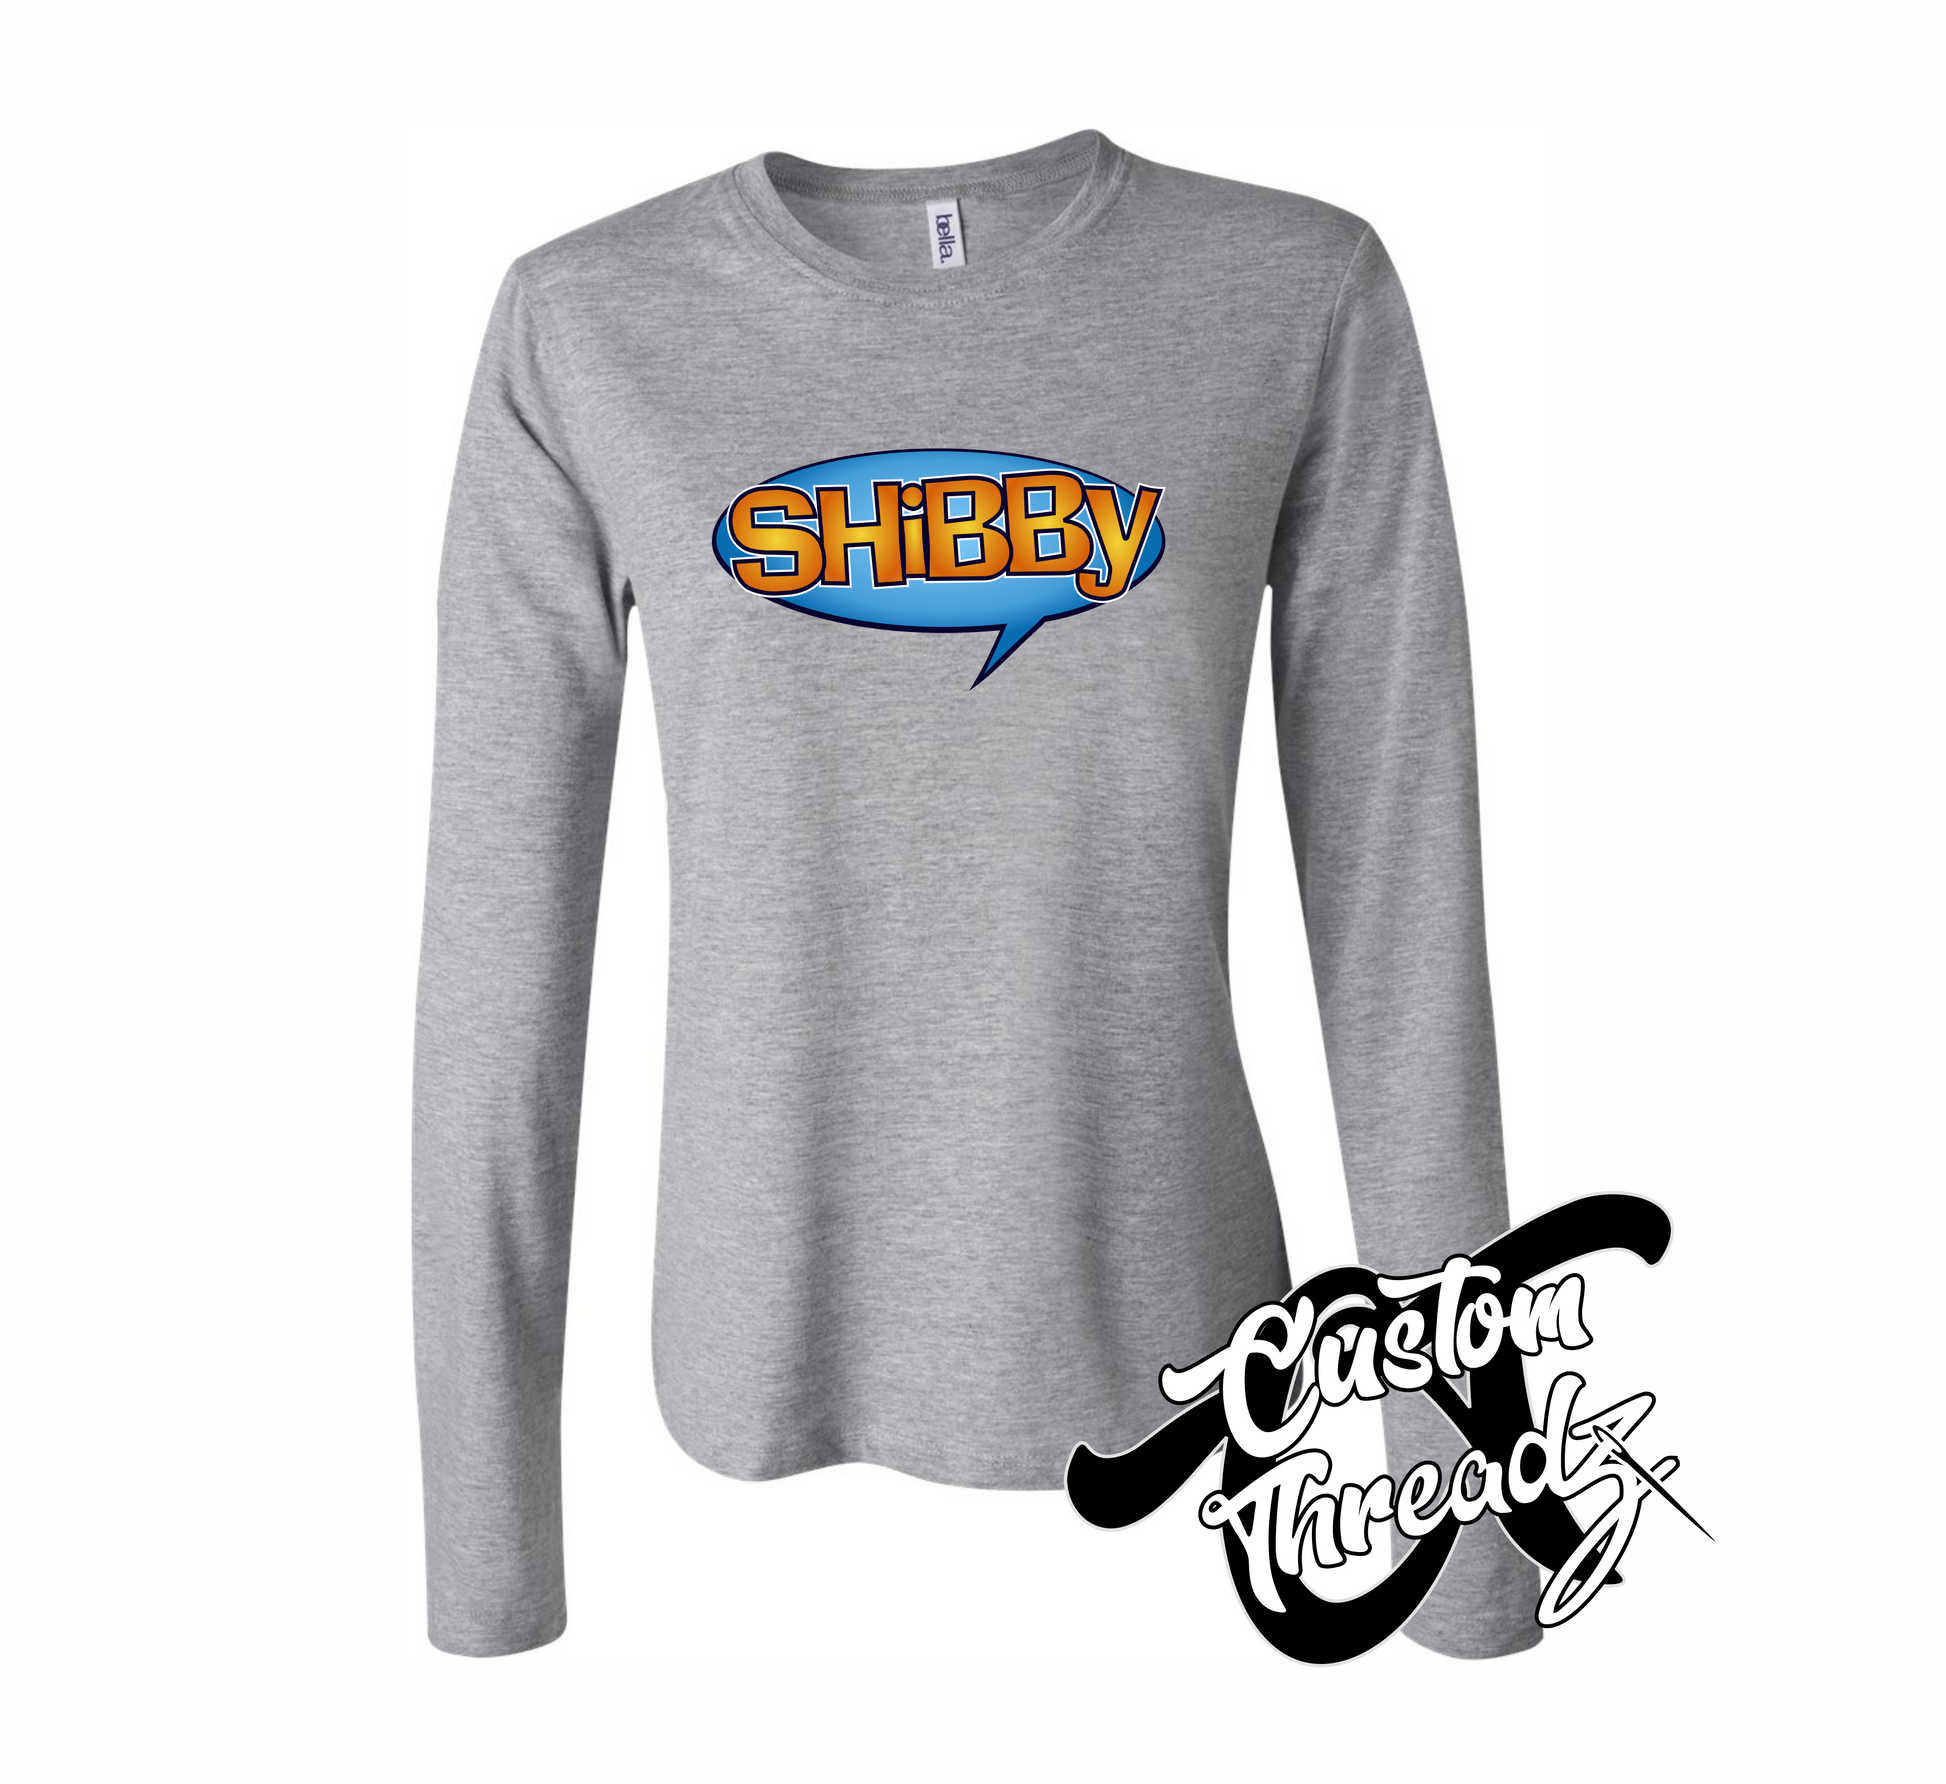 athletic heather grey womens long sleeve tee with shibby dude wheres my car DTG printed design